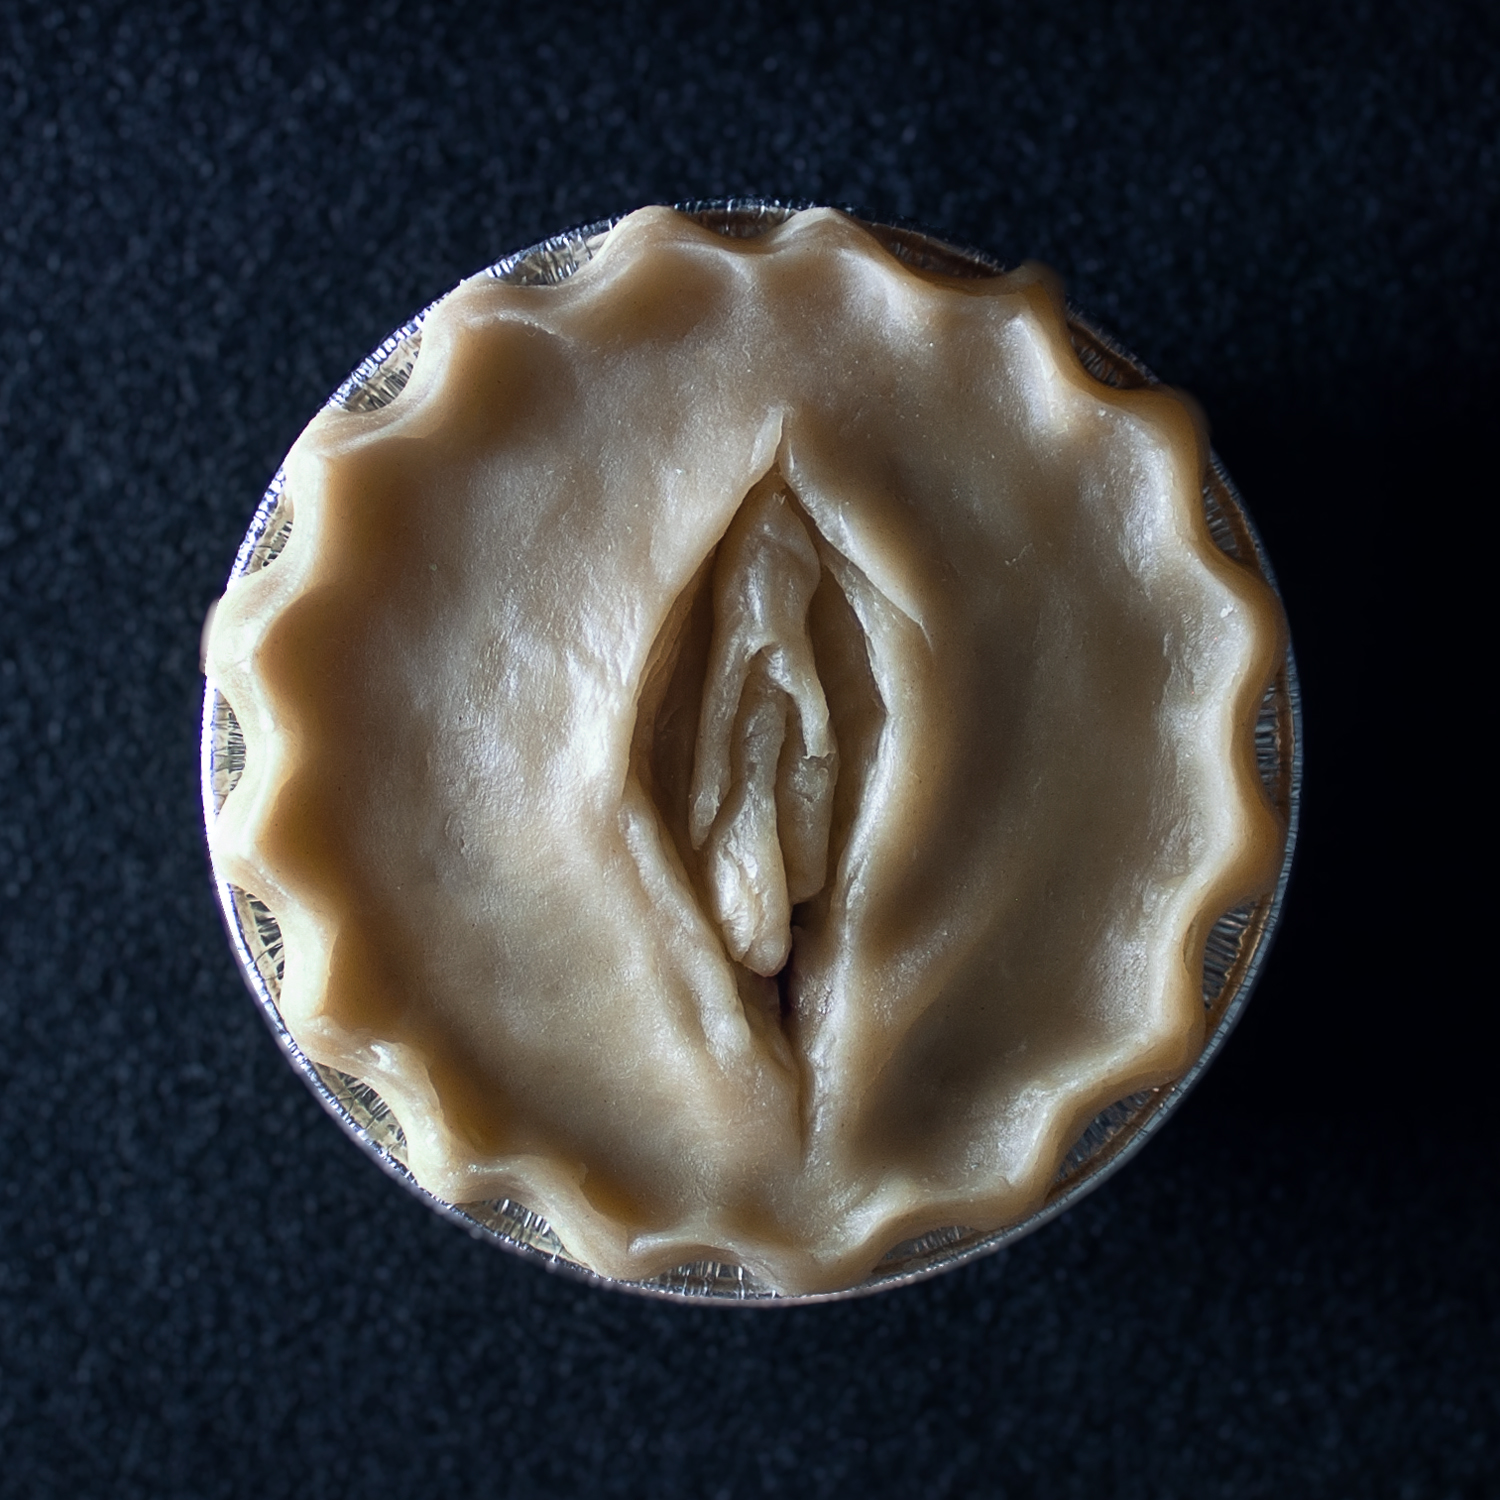 Pie 2, a pie sculpted to appear like a vulva